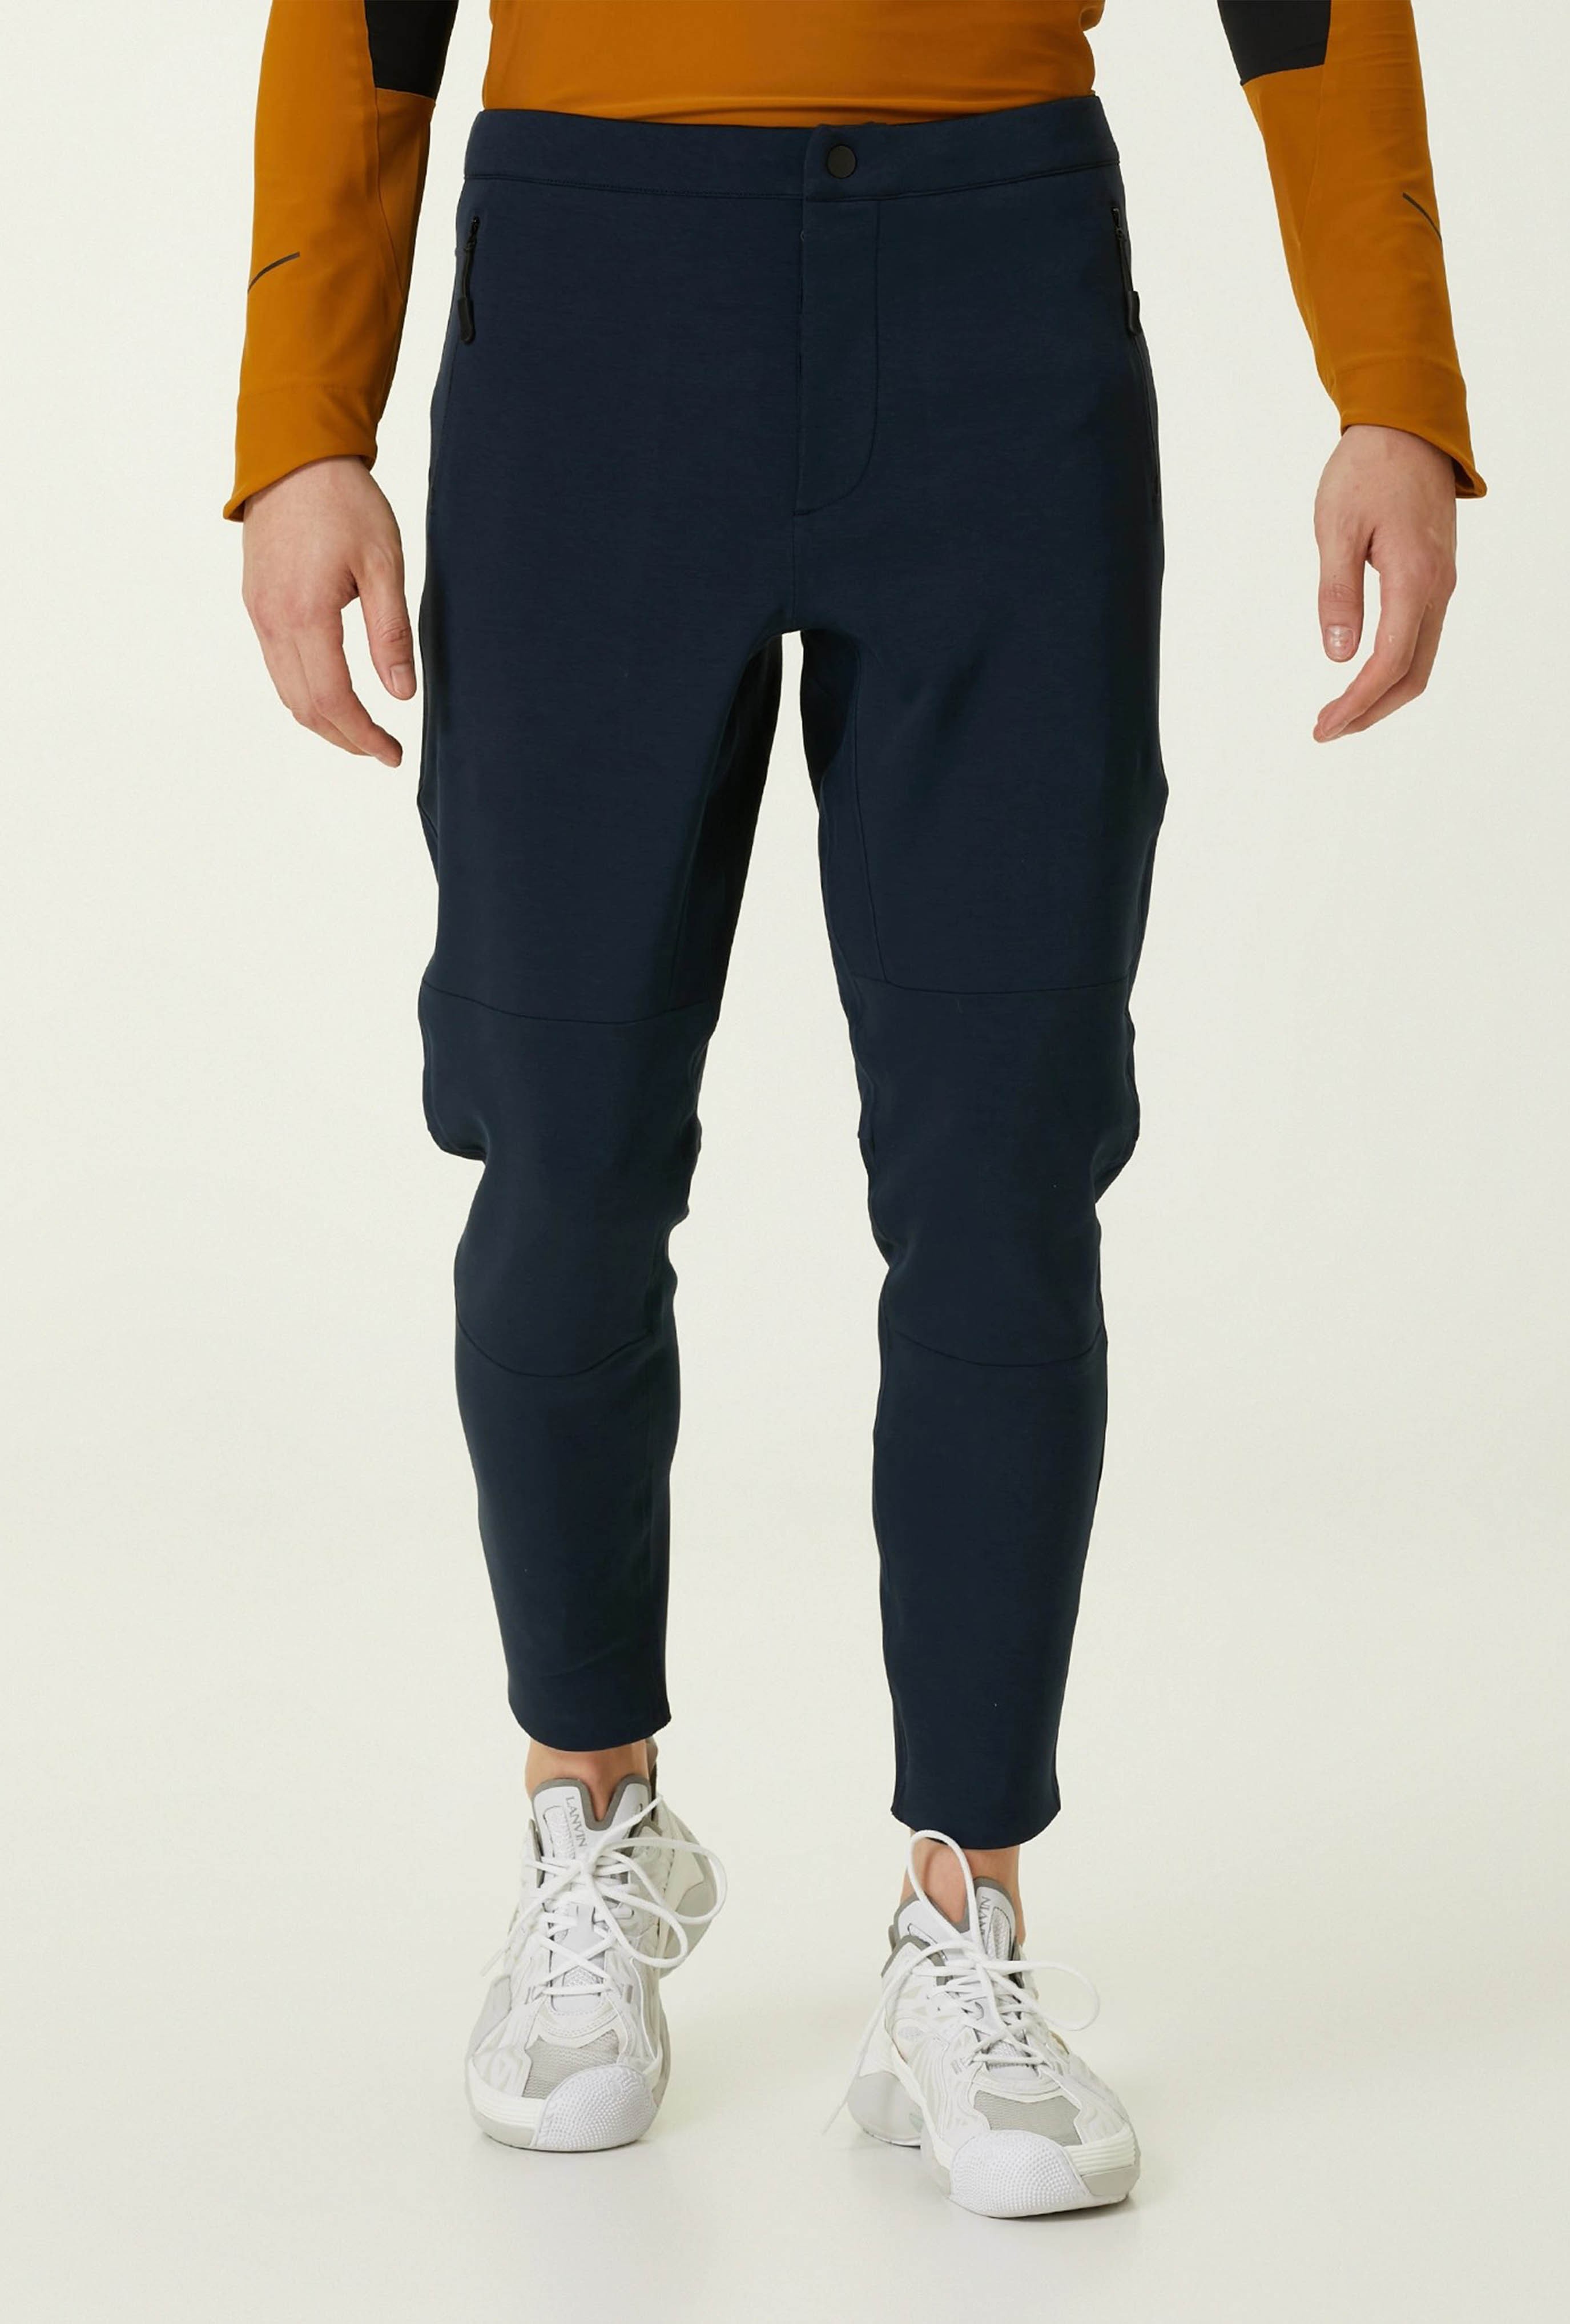 NEO SWEAT RELAX PANT